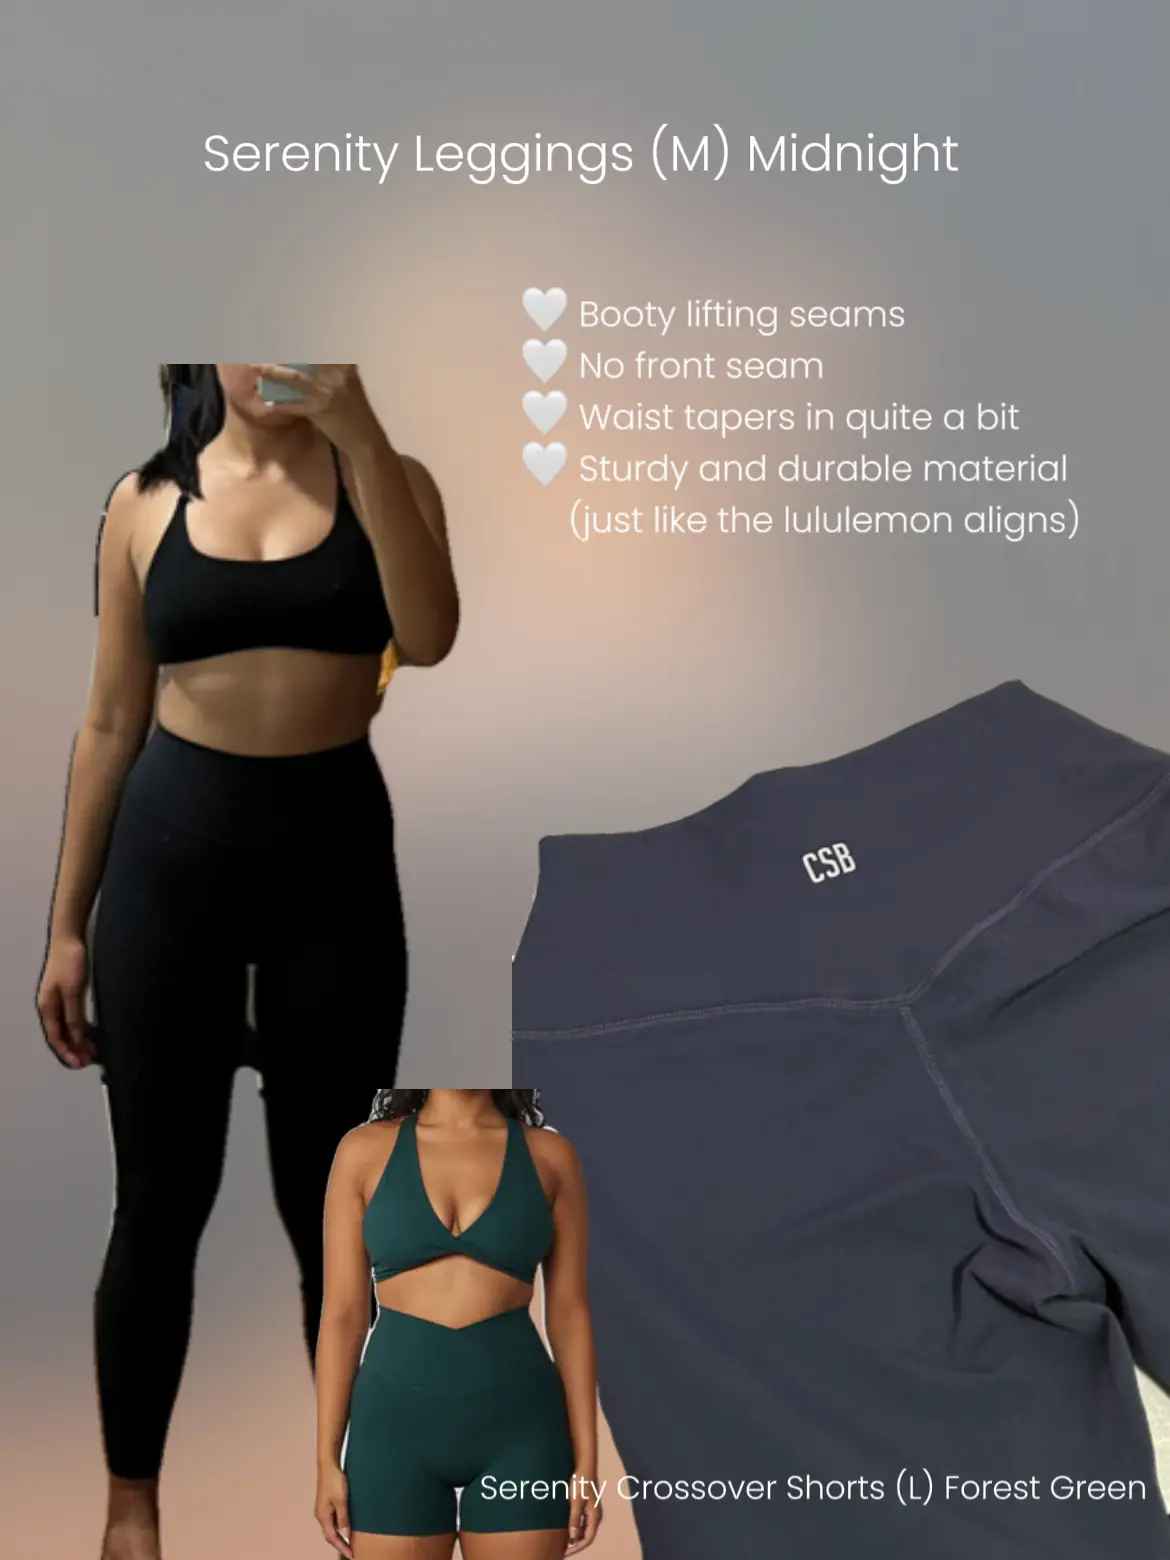 S) ALO YOGA AIRLIFT LEGGING IN ANTHRACITE GREY, Women's Fashion, Activewear  on Carousell